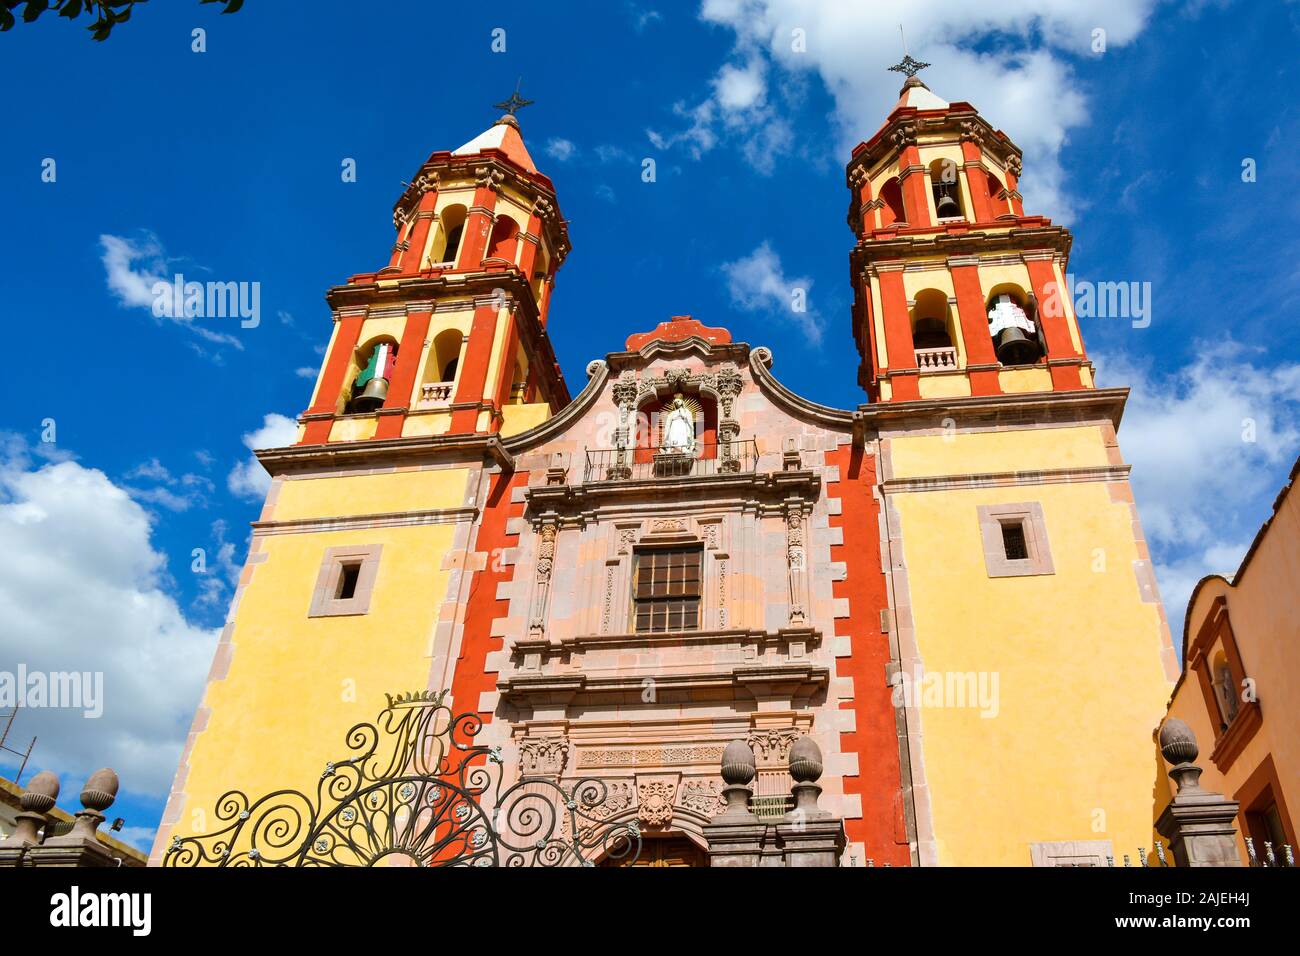 Church of the Congregation of Our Lady of Guadalupe - Queretaro, Mexico Stock Photo